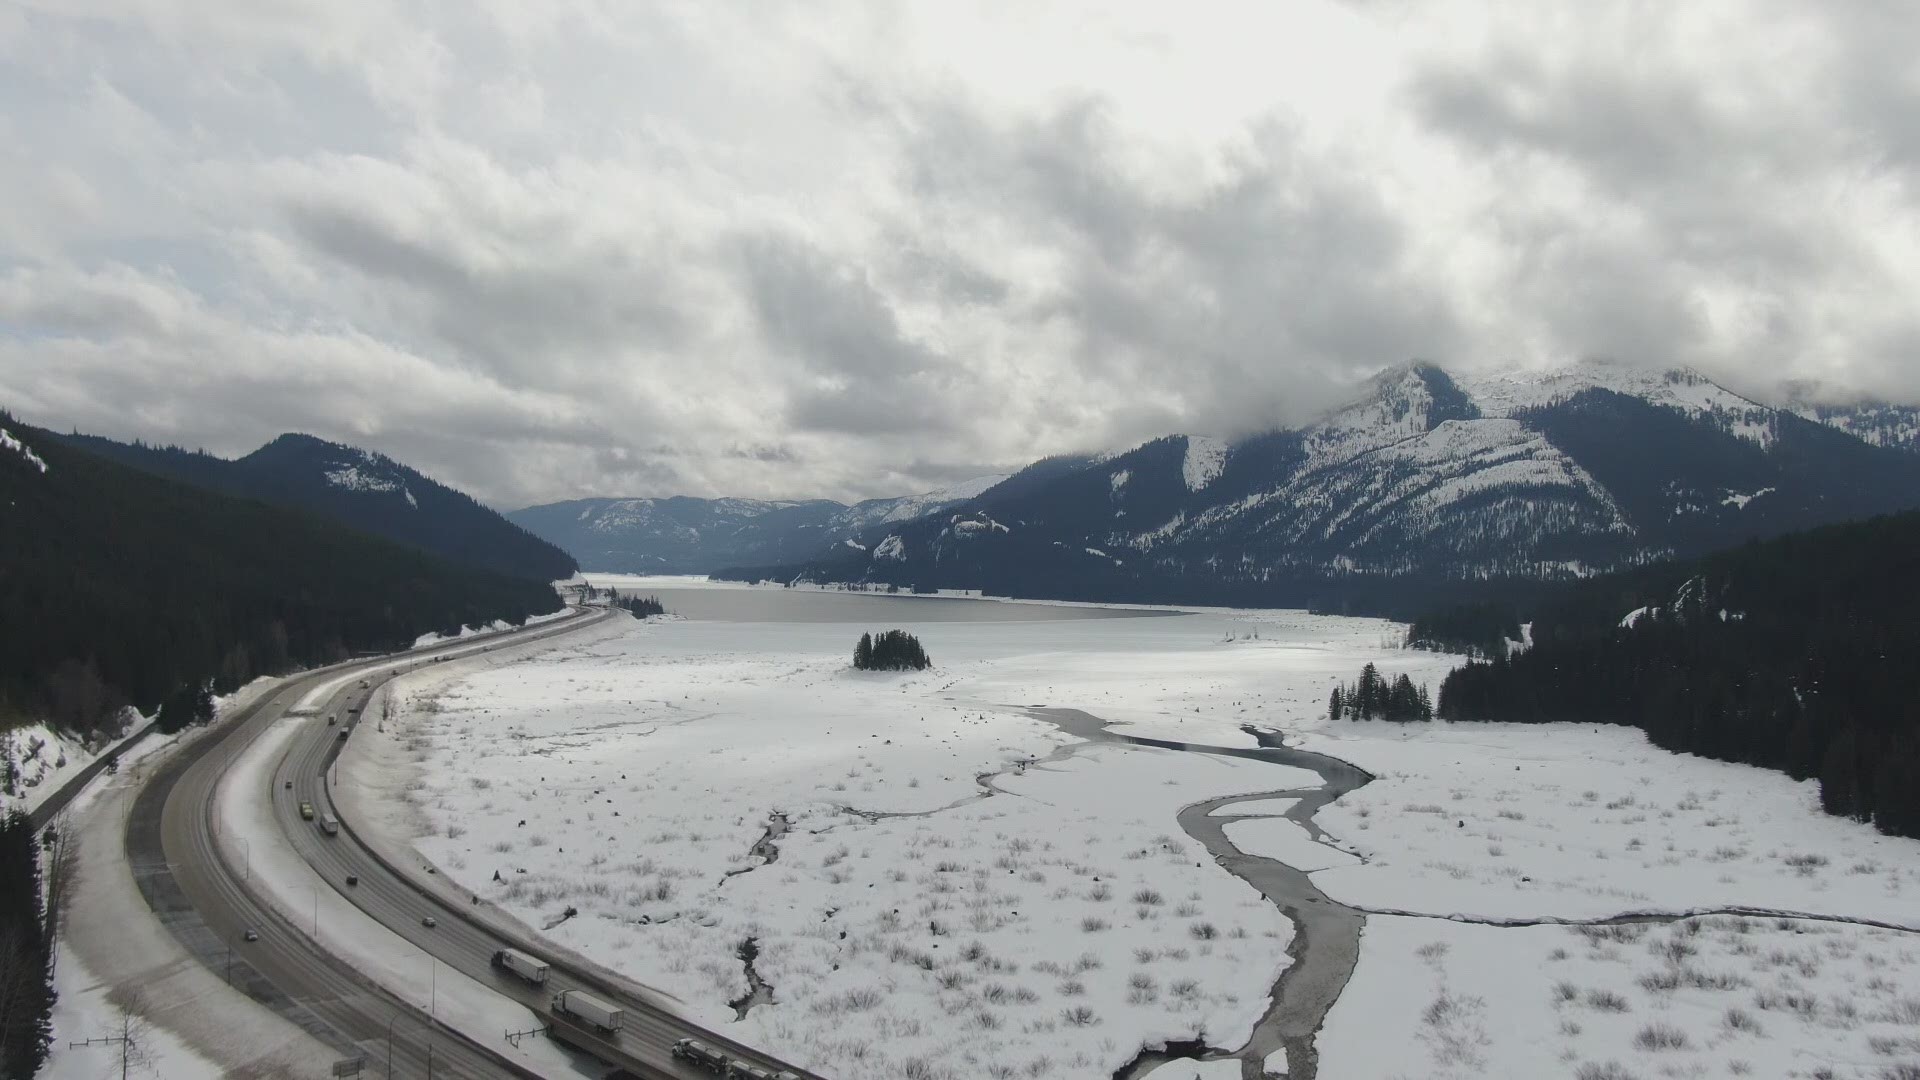 Drone footage from Snoqualmie Pass on March 2, 2021, showing significant snowfall.